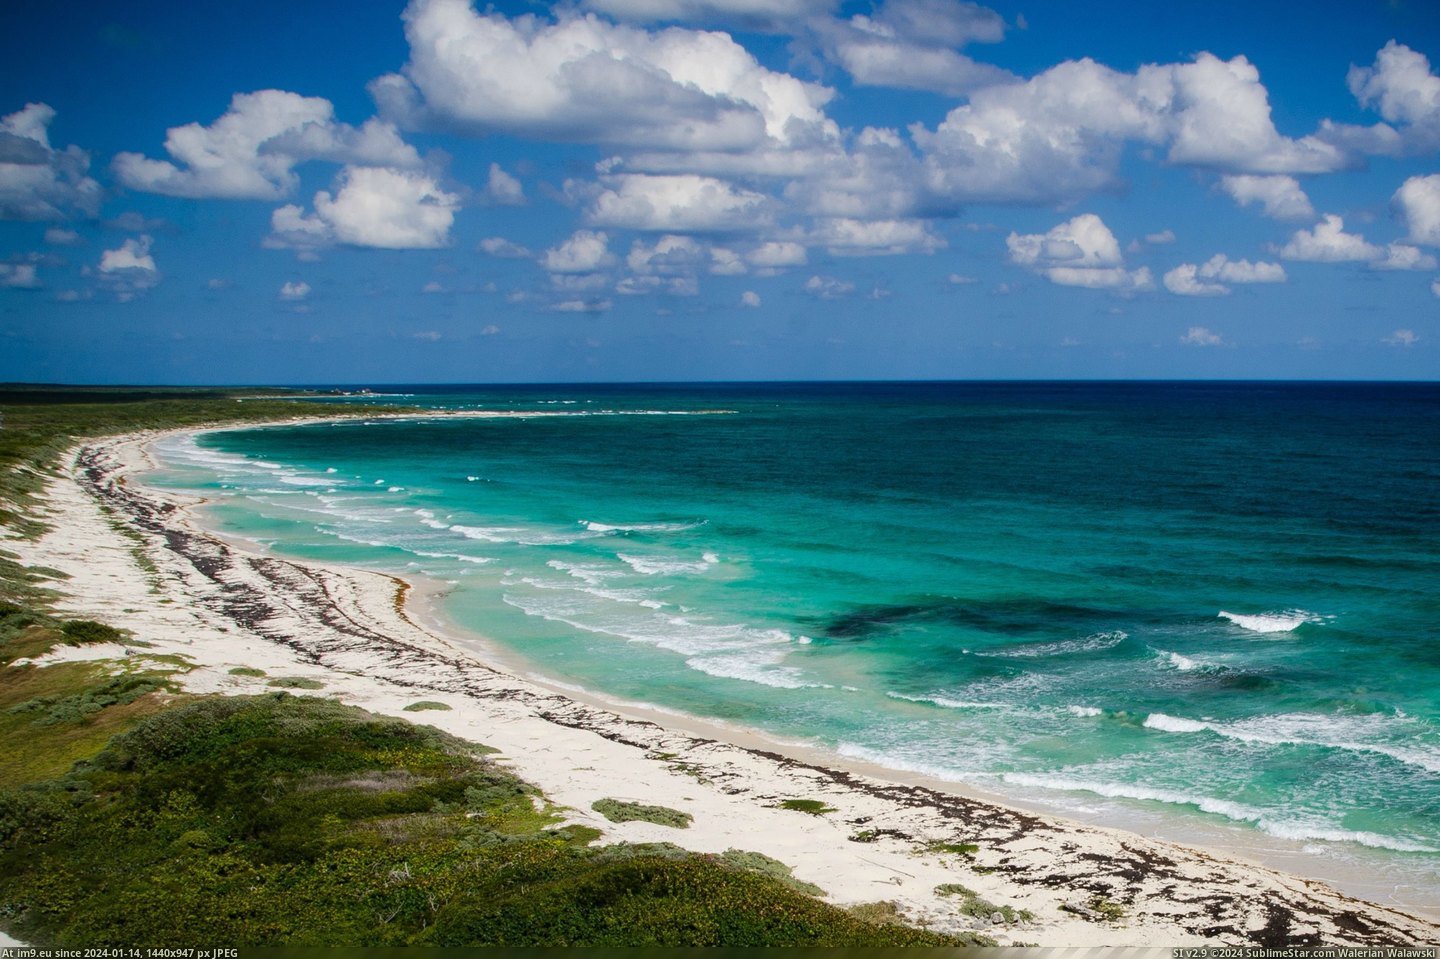 #Island #Mexico #Atop #Punta #Sur #Lighthouse [Earthporn] The view from atop Punta Sur Lighthouse, Cozumel Island, Mexico. Taken by doublesecretprobatio. [2681x1775] - Pic. (Image of album My r/EARTHPORN favs))